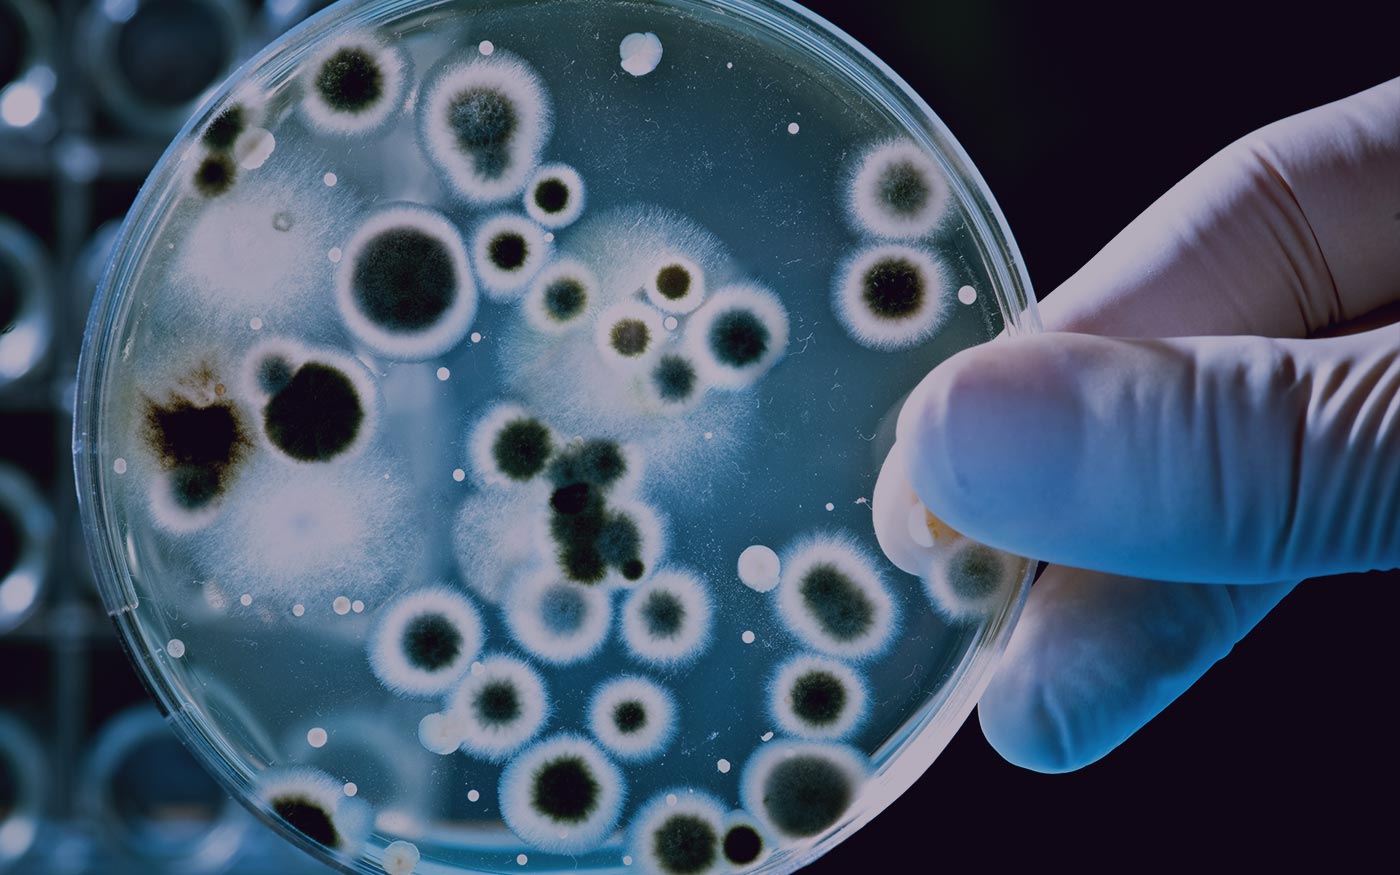 American Society for Microbiology | Strategy, User Experience, Design, Development